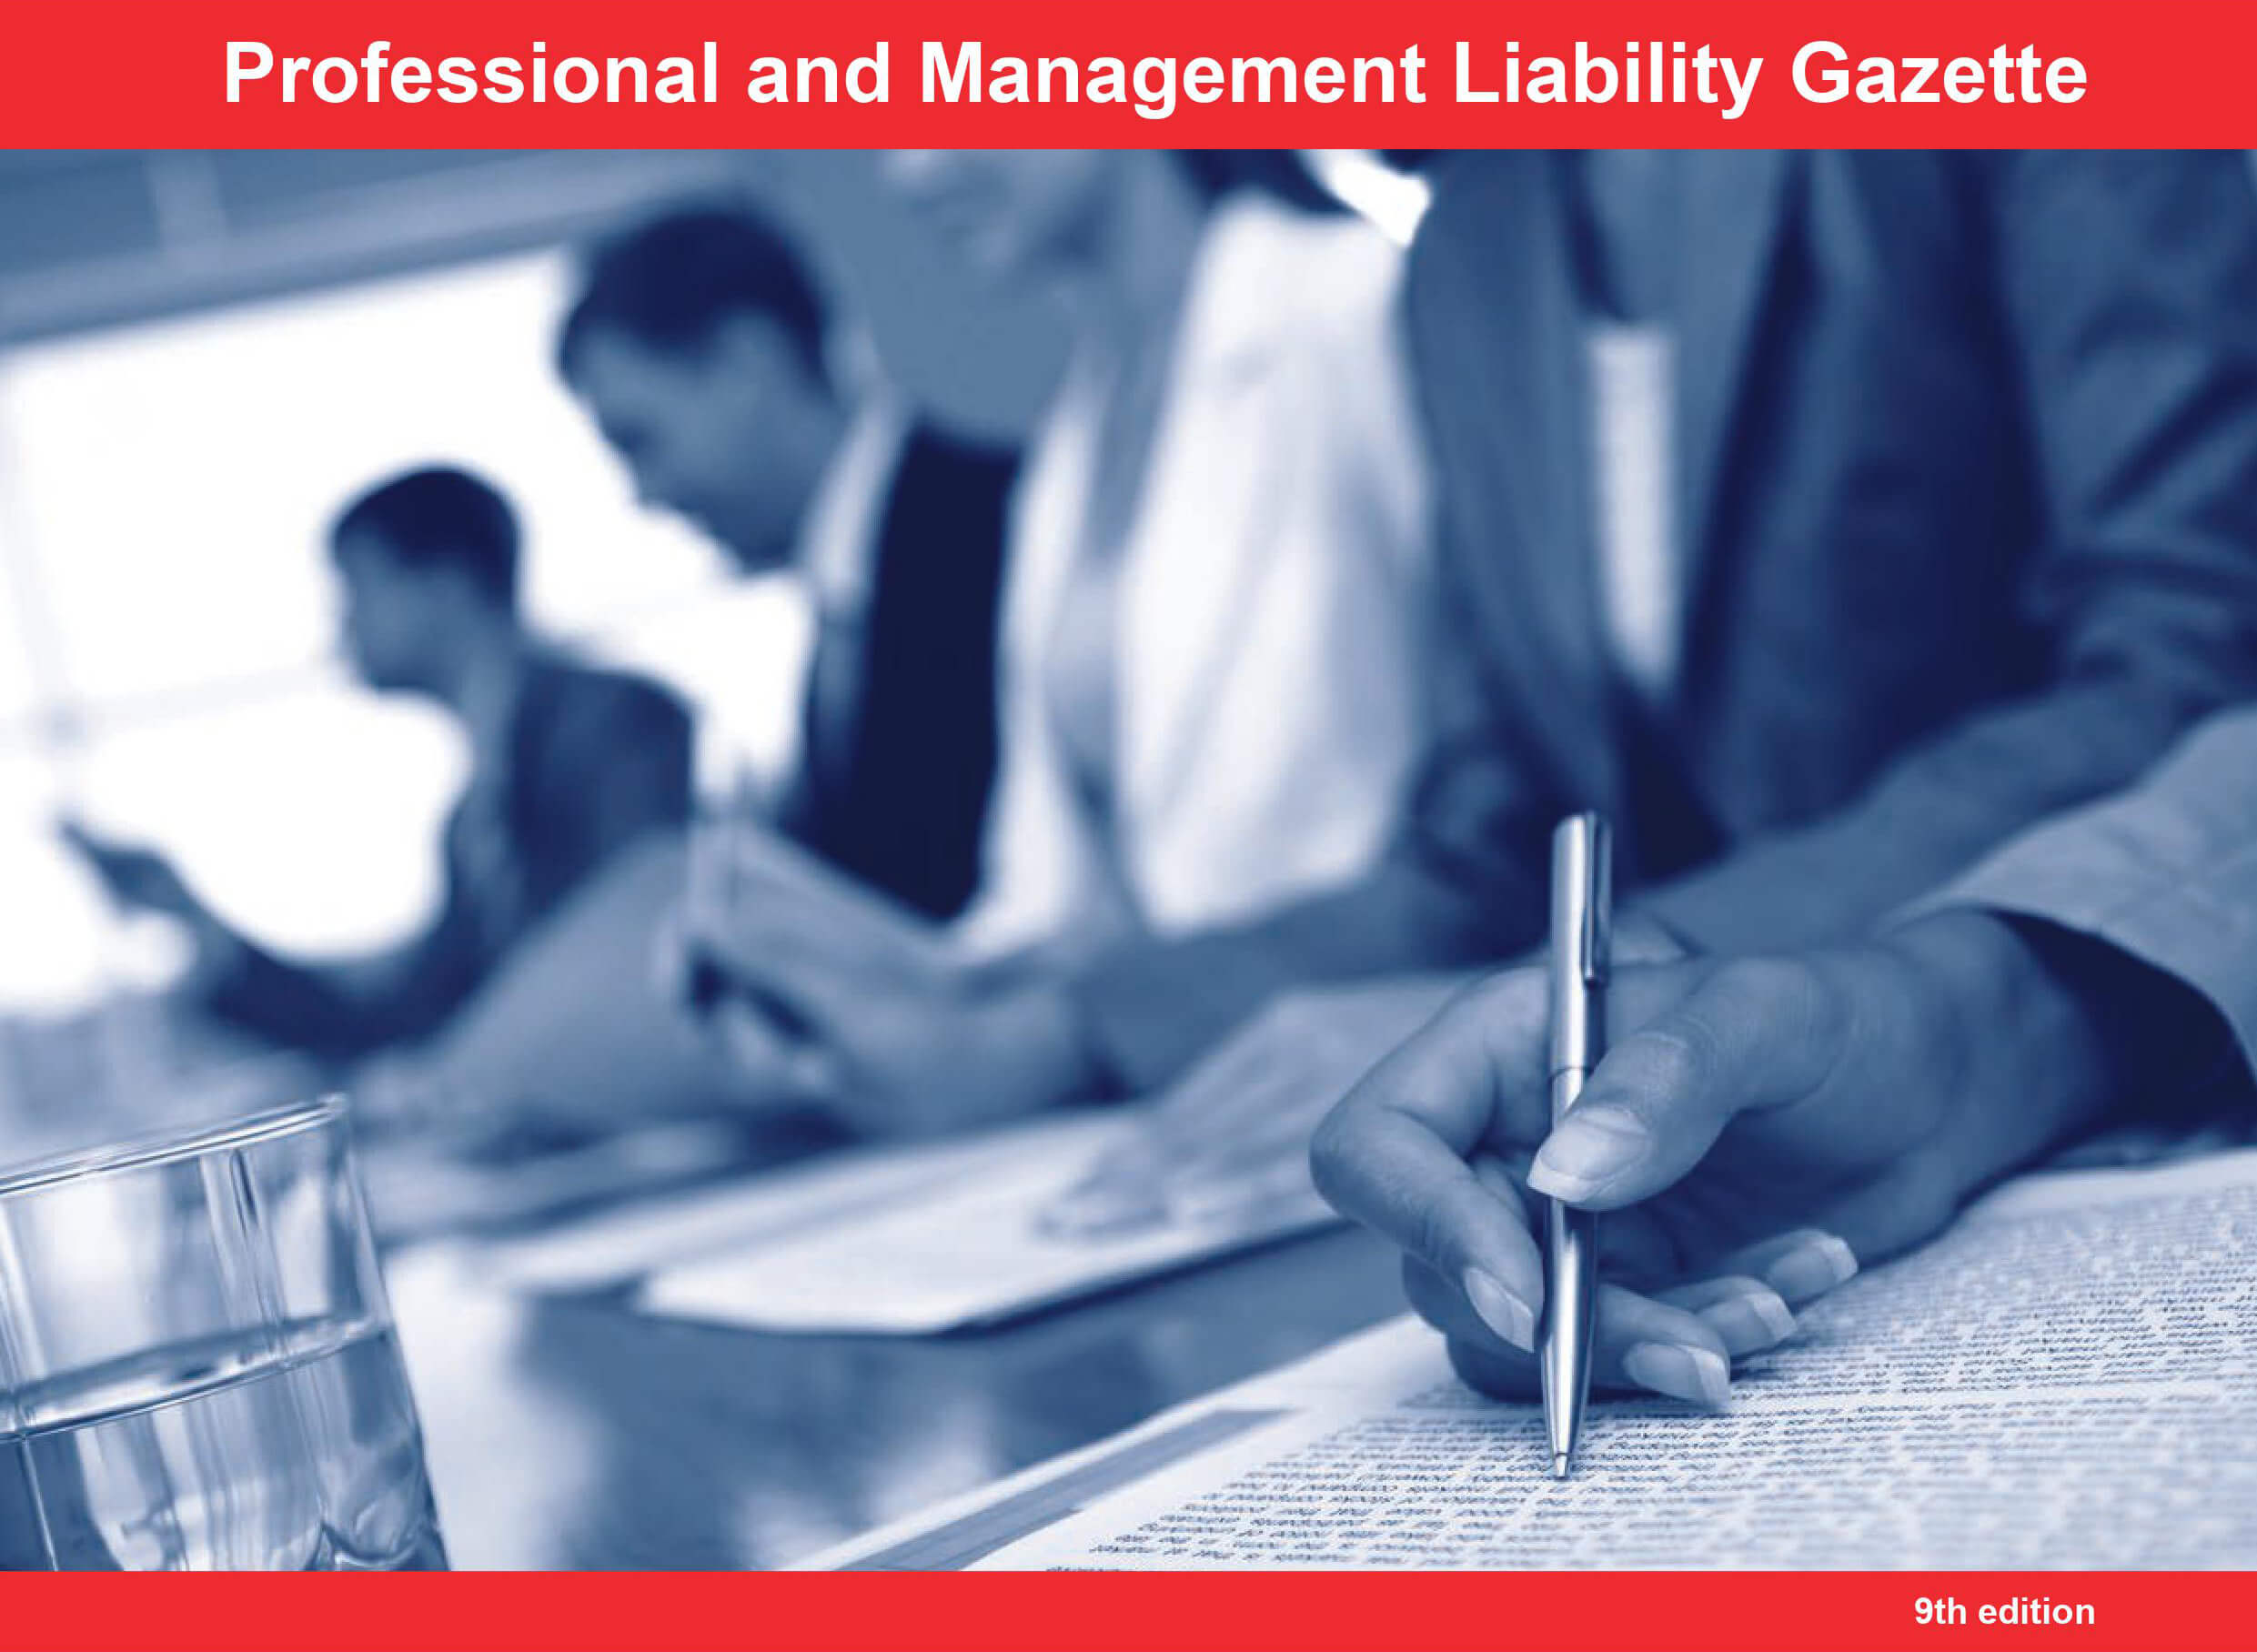 Professional and Management Liability Gazette (9th edition)